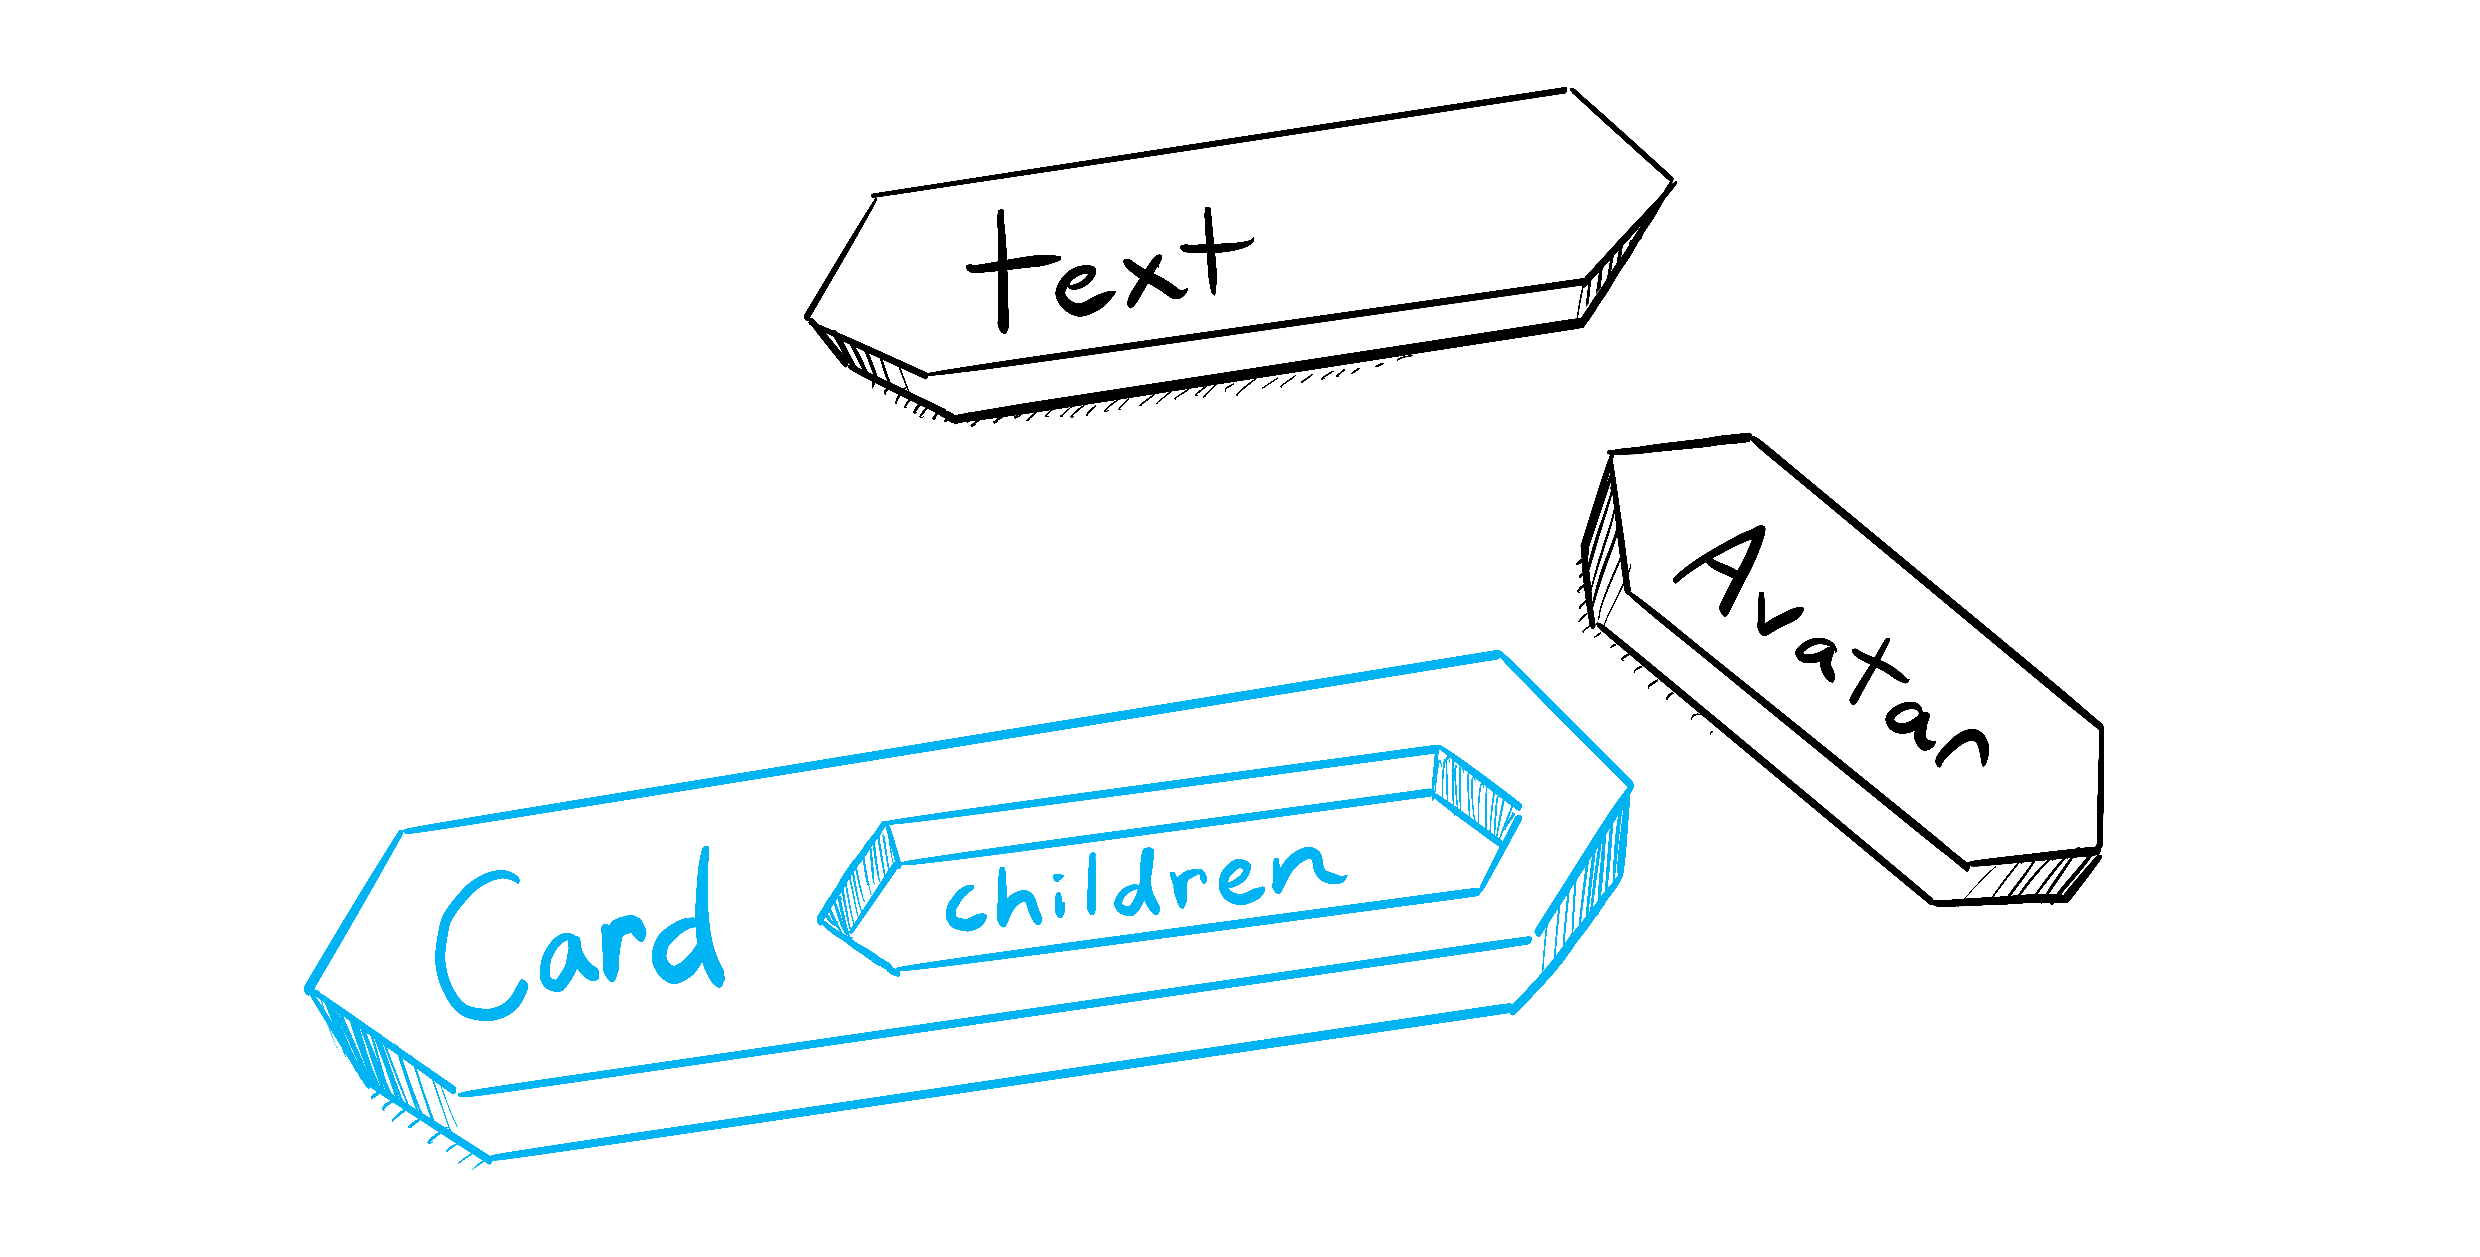 A puzzle-like Card tile with a slot for "children" pieces like text and Avatar